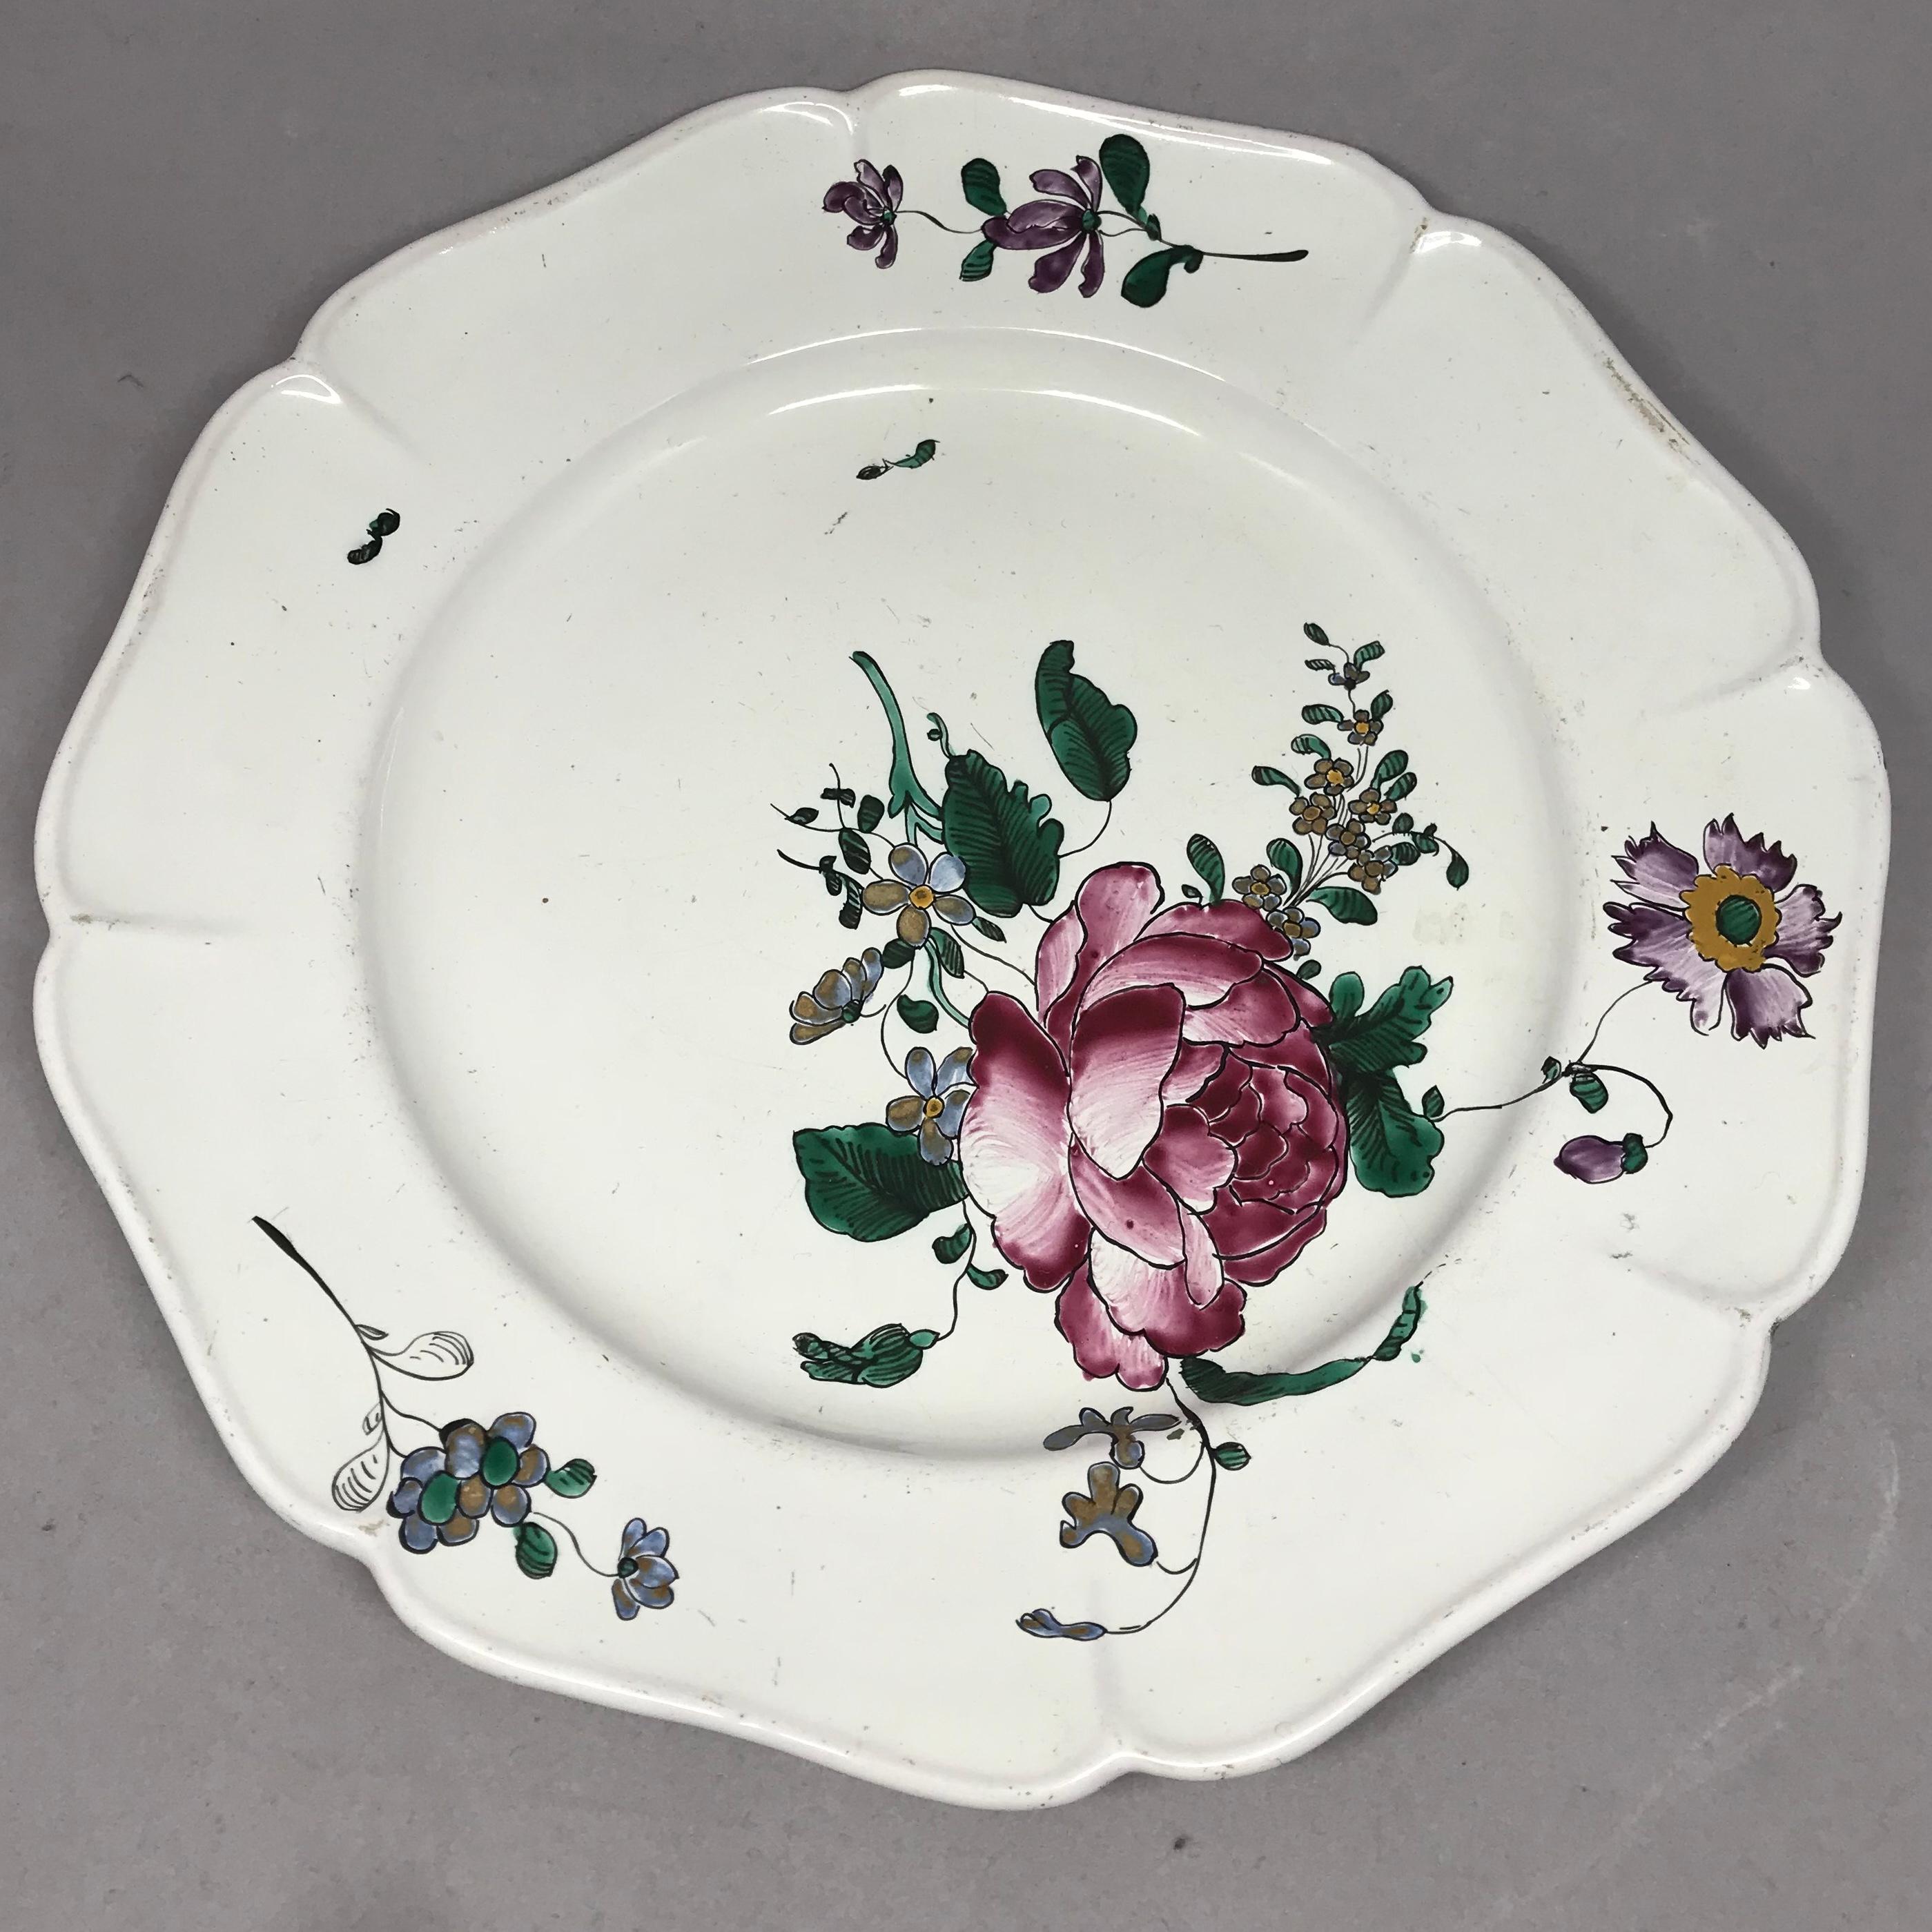 Strasbourg faience floral plate. Antique faience plate with large floral bouquets and lobed rims with further floral sprays and insects; with blue underglaze markings for Hannong Factory, France, circa 1750.
Dimension: 9